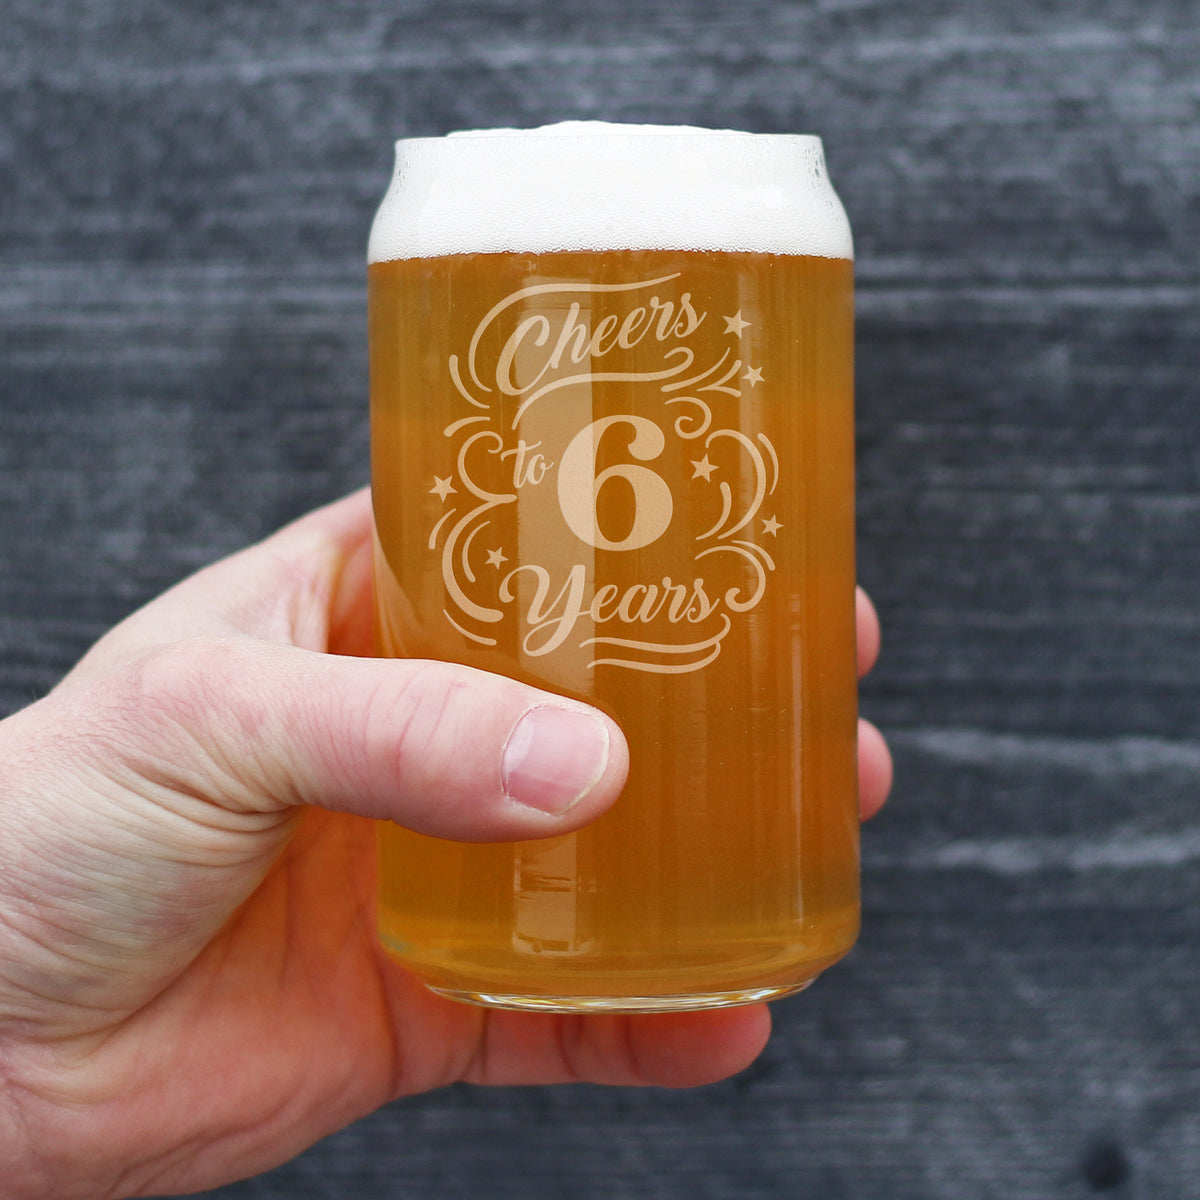 Cheers to 6 Years - Beer Can Pint Glass Gifts for Women &amp; Men - 6th Anniversary Party Decor - 16 Oz Glasses